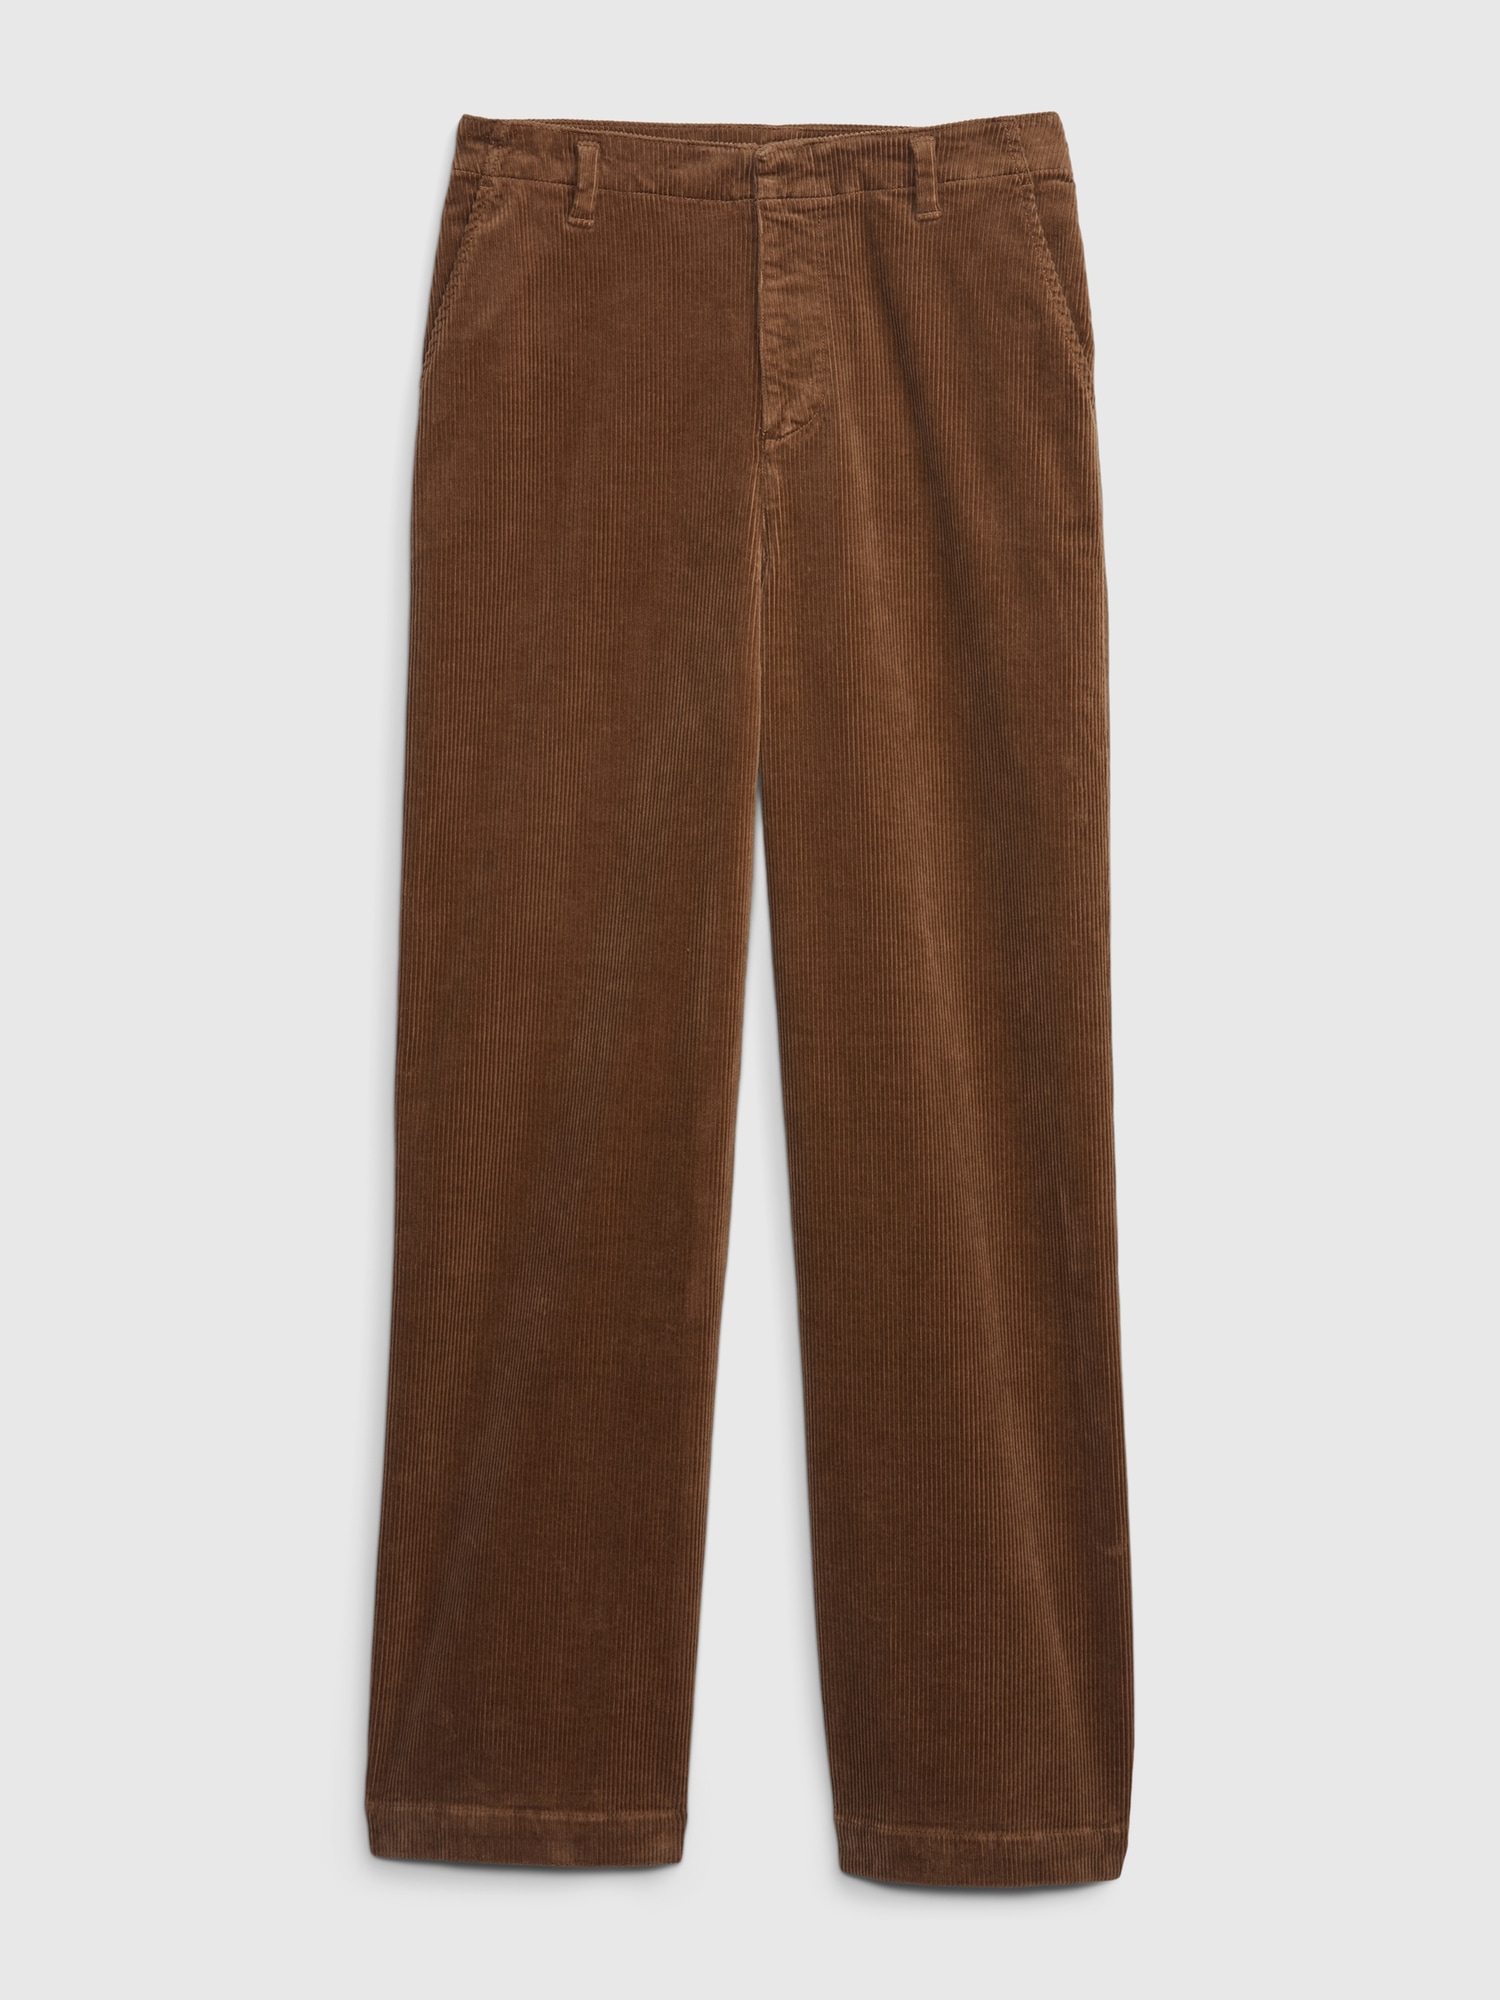 Mid Rise Loose Corduroy Pants with Washwell | Gap